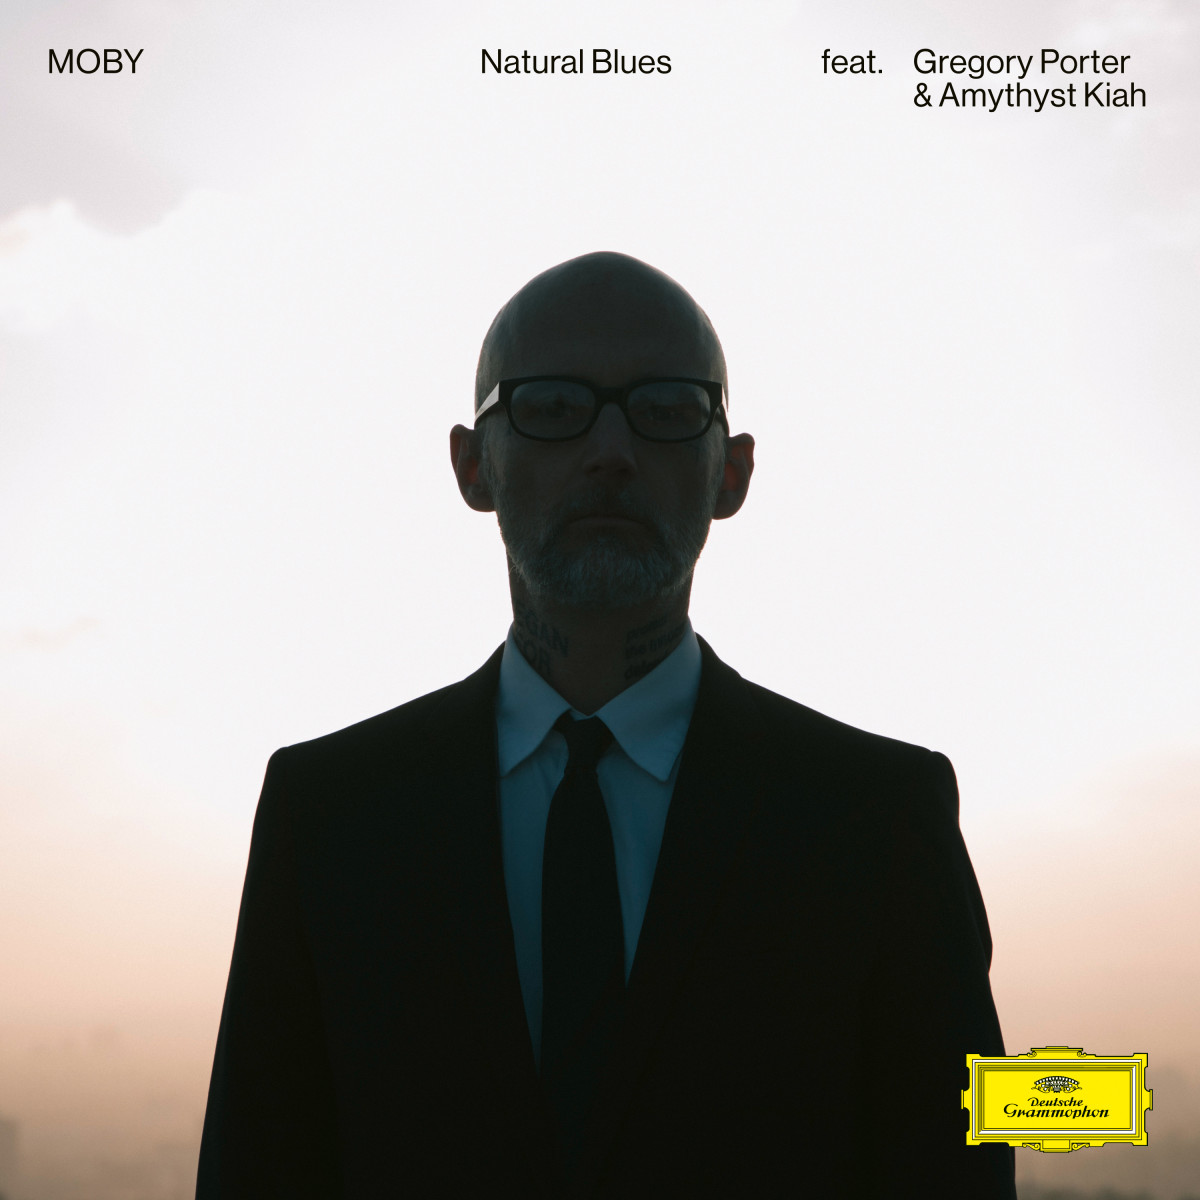 The last day moby перевод песни. Moby. Moby natural Blues. Gregory Porter Amythyst Kiah. Moby - natural Blues альбом.